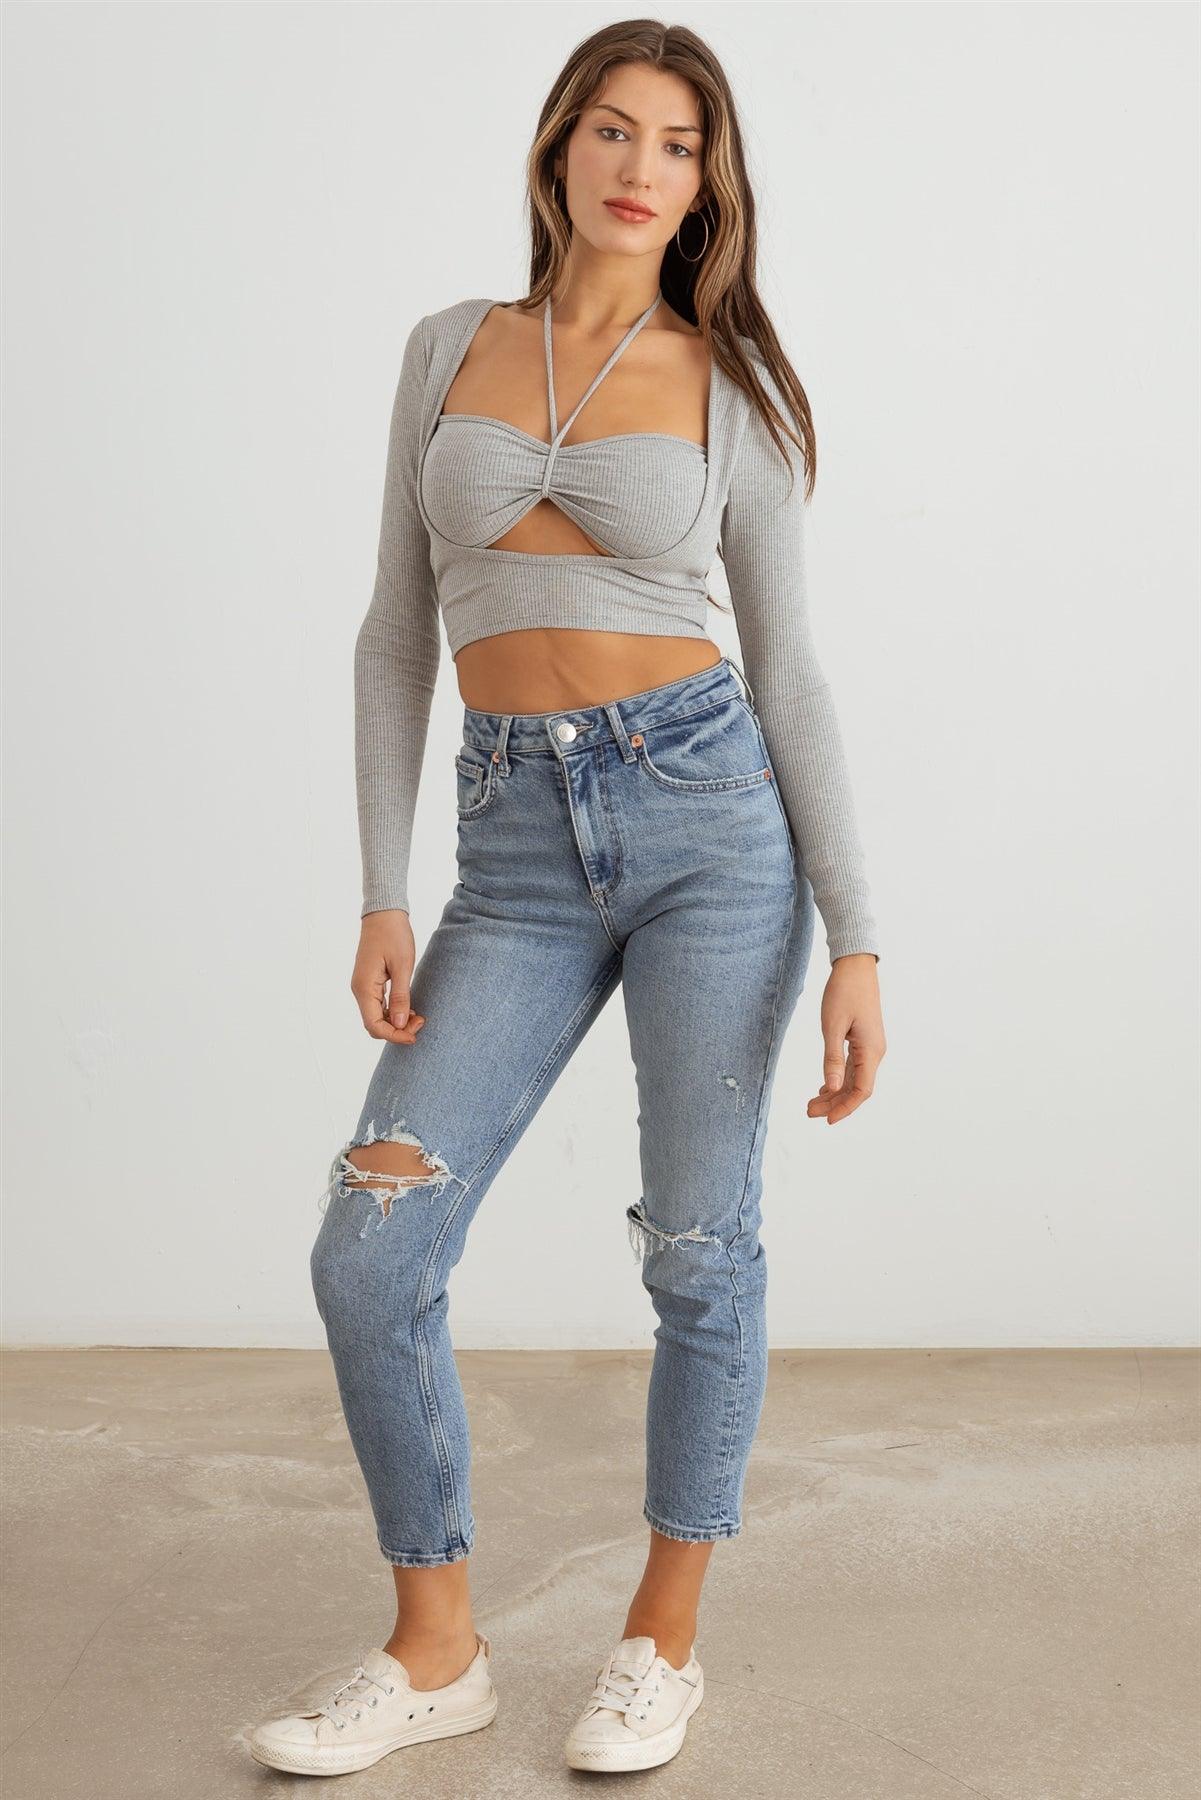 Heather Grey Ribbed Bustier Cut-Out Long Sleeve Crop Top /2-2-2